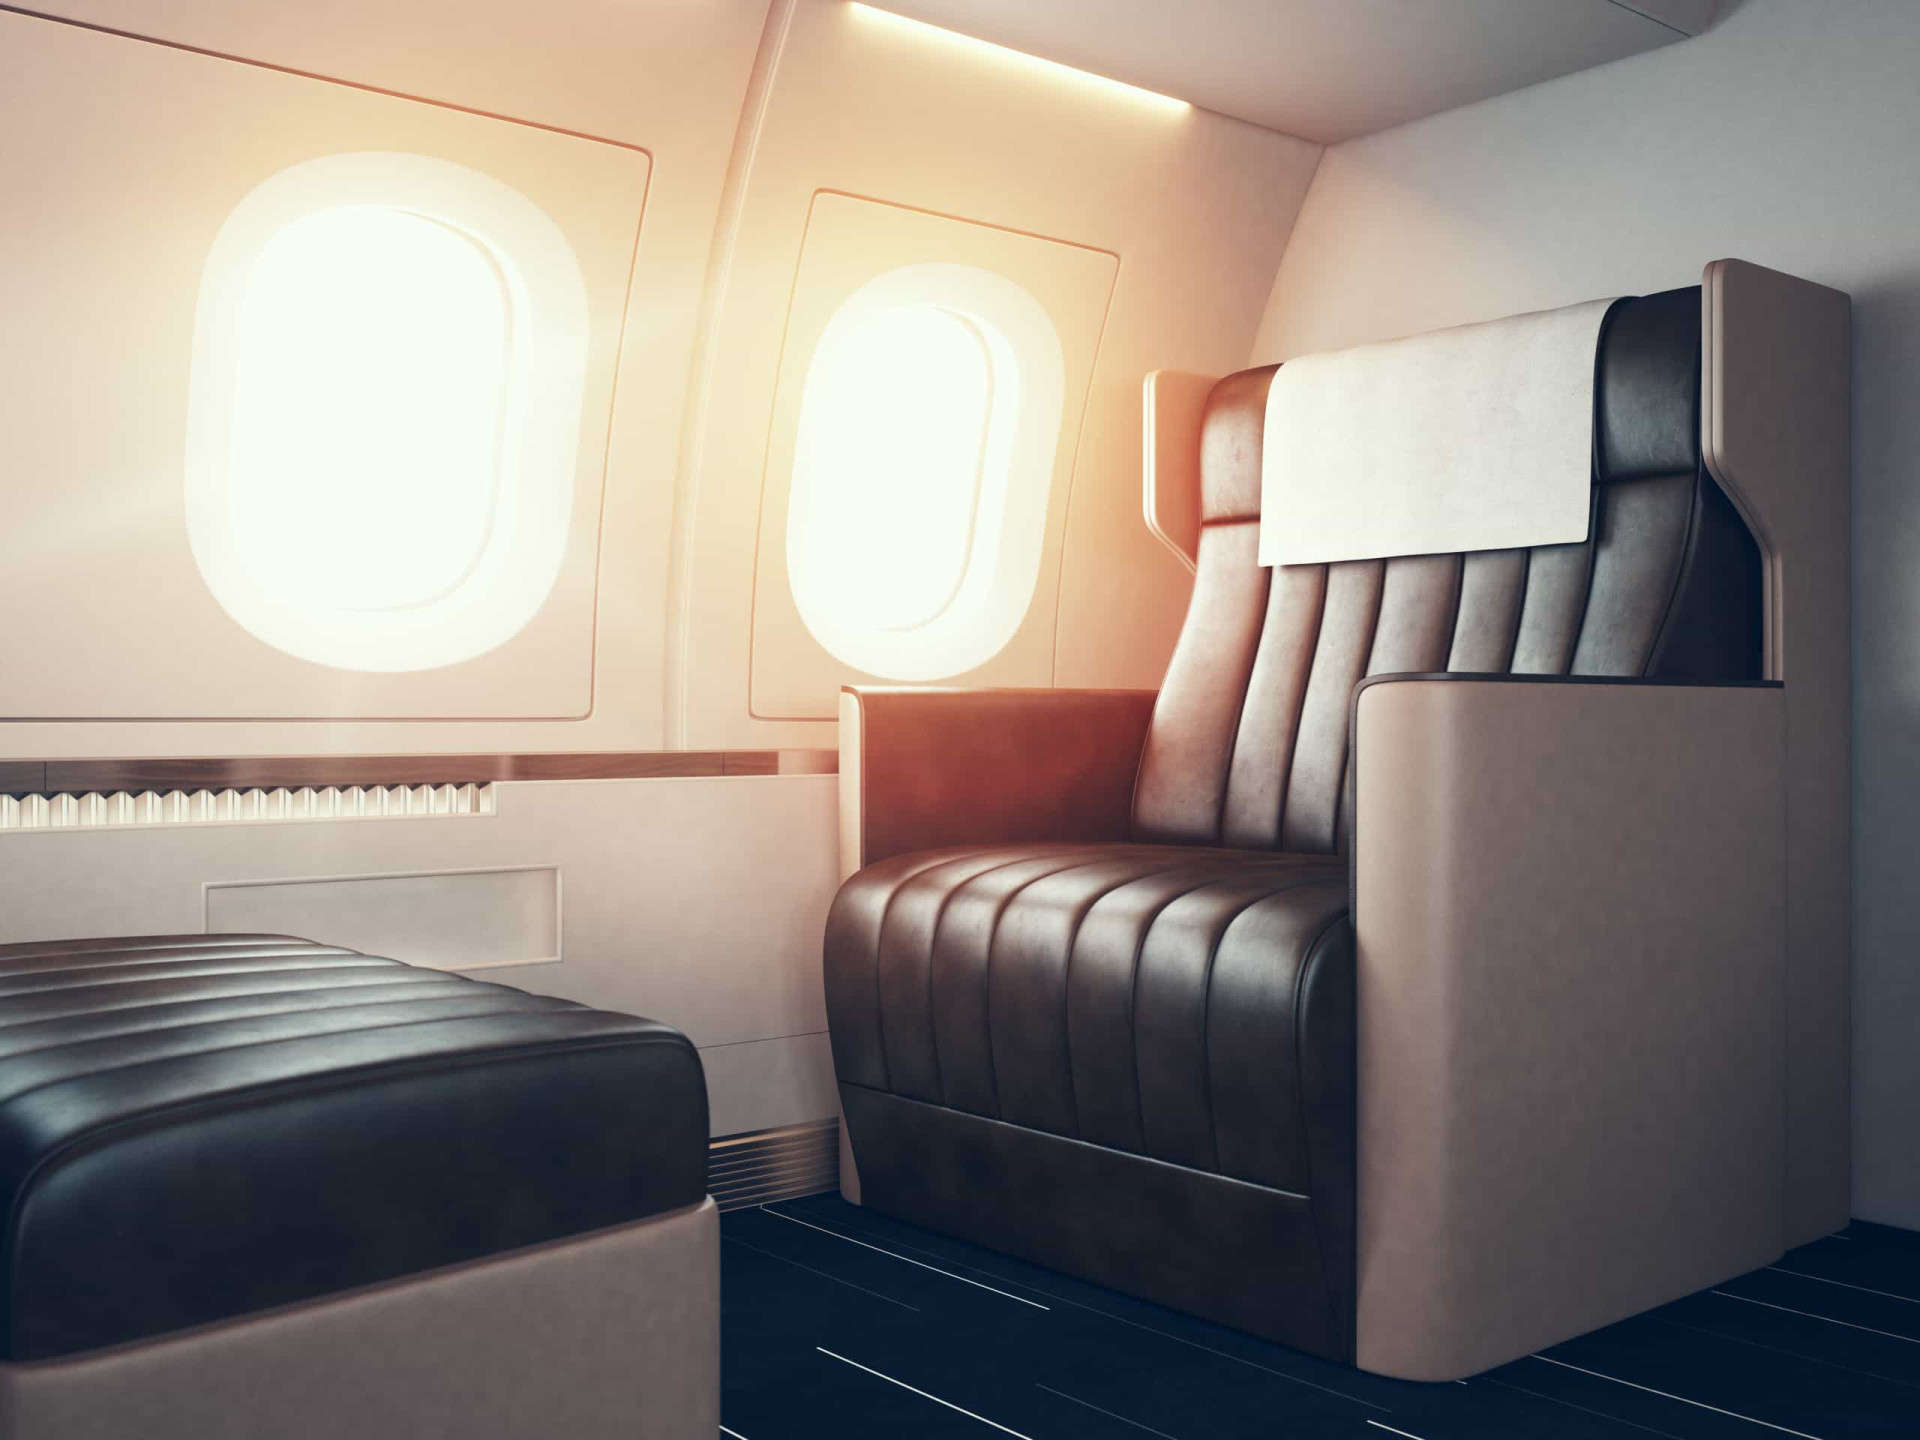 <p>If you have air miles, make sure to use them on an upgrade. You will get much more comfort and arrive at your destination rested after many hours of traveling.</p><p>You may also like:<a href="https://www.starsinsider.com/n/178190?utm_source=msn.com&utm_medium=display&utm_campaign=referral_description&utm_content=500296v1en-us"> Wedding dress trends for 2018</a></p>